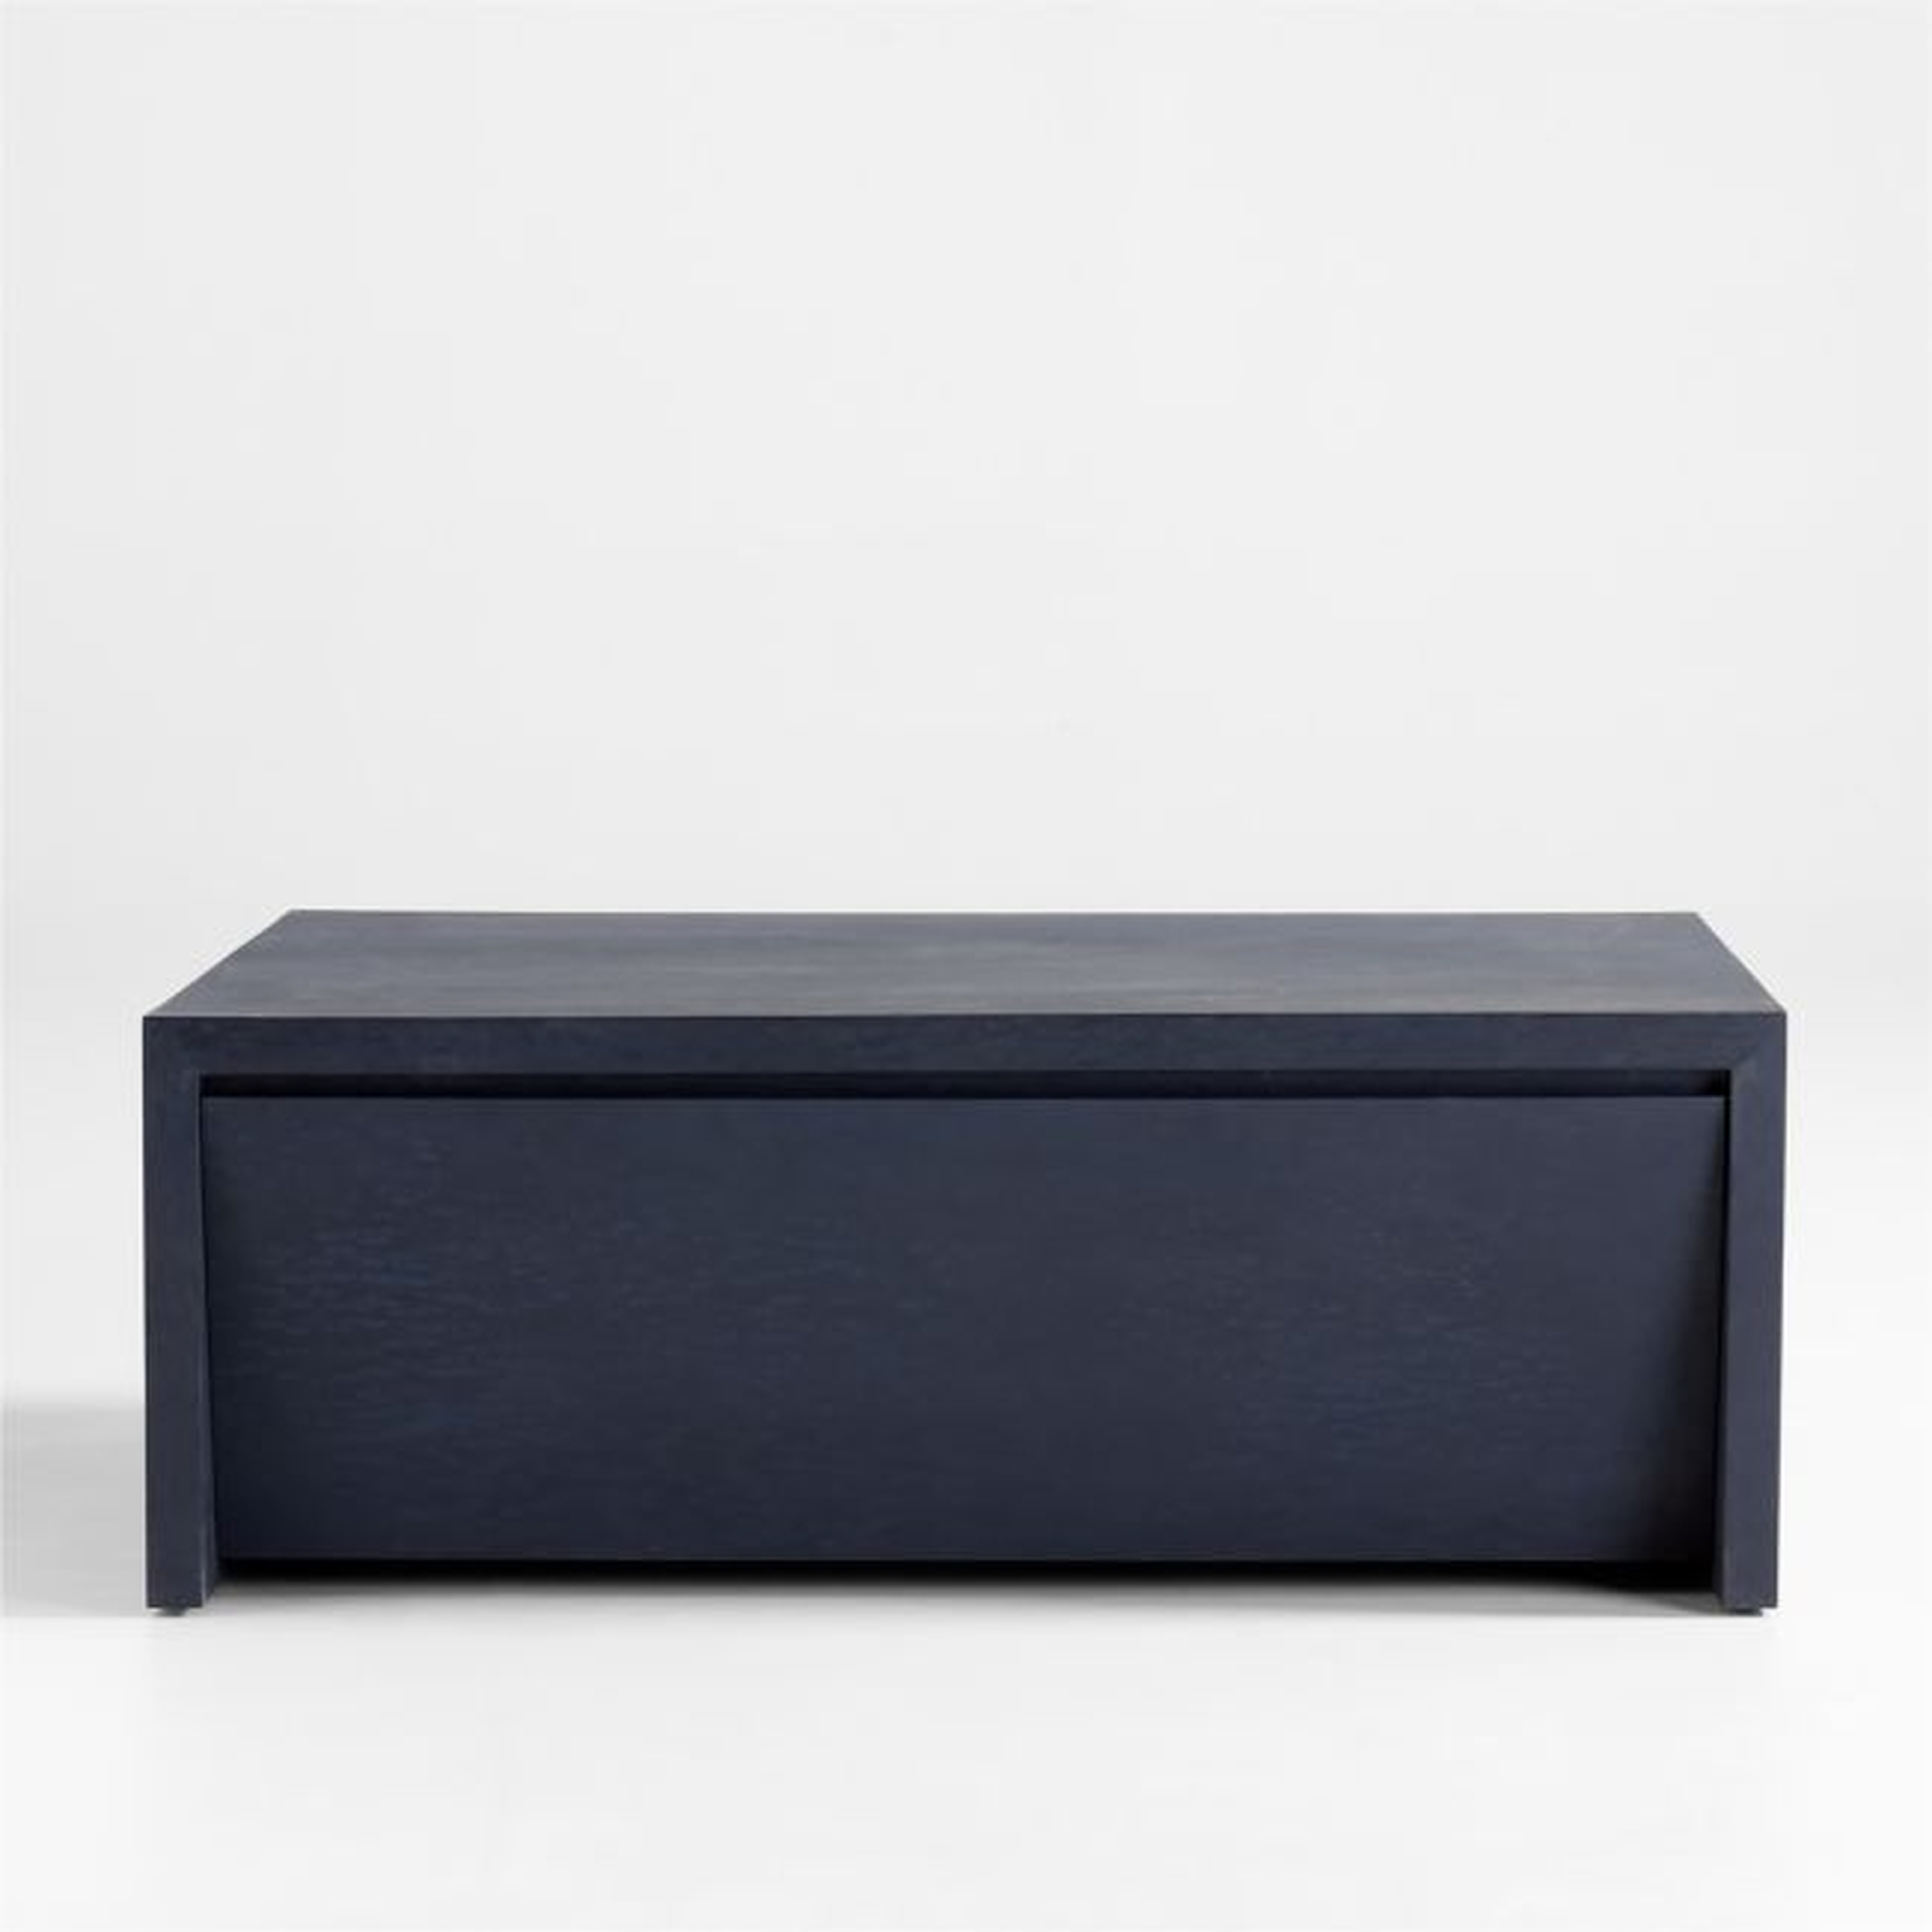 Vander Charcoal Wood Storage Coffee Table - Crate and Barrel